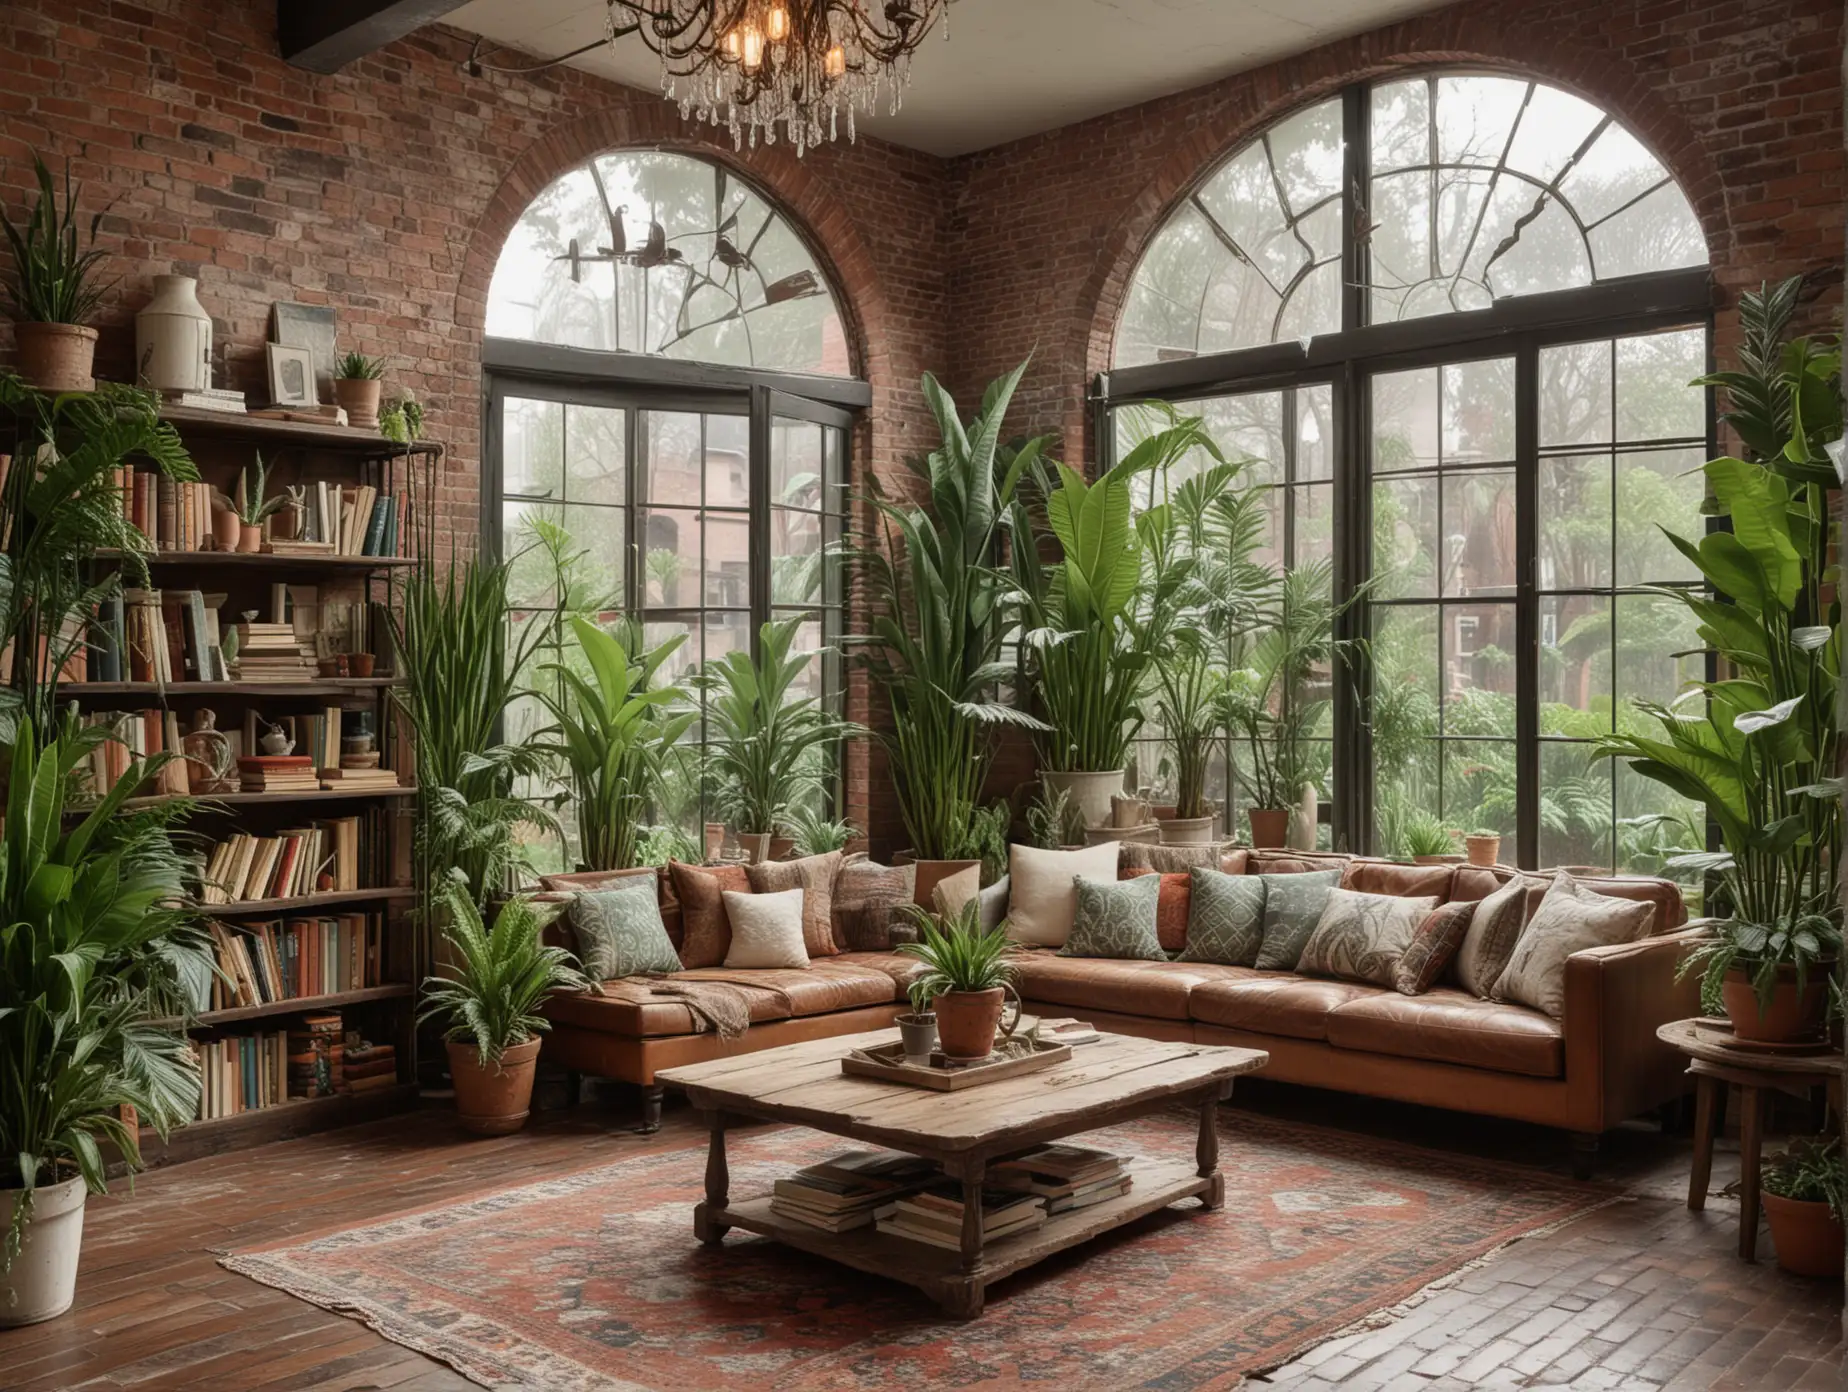 A cozy vintage lounge interior decor image,lrge glass windows, a rustic wooden coffee table, a bookshelf filled with old books, and indoor plants like snake plants and ferns in ceramic pots. The wide shot highlights exposed brick walls with weathered paint, large windows overlooking a rainy garden, and a patterned rug anchoring the seating area. A vintage chandelier adds an elegant touch.